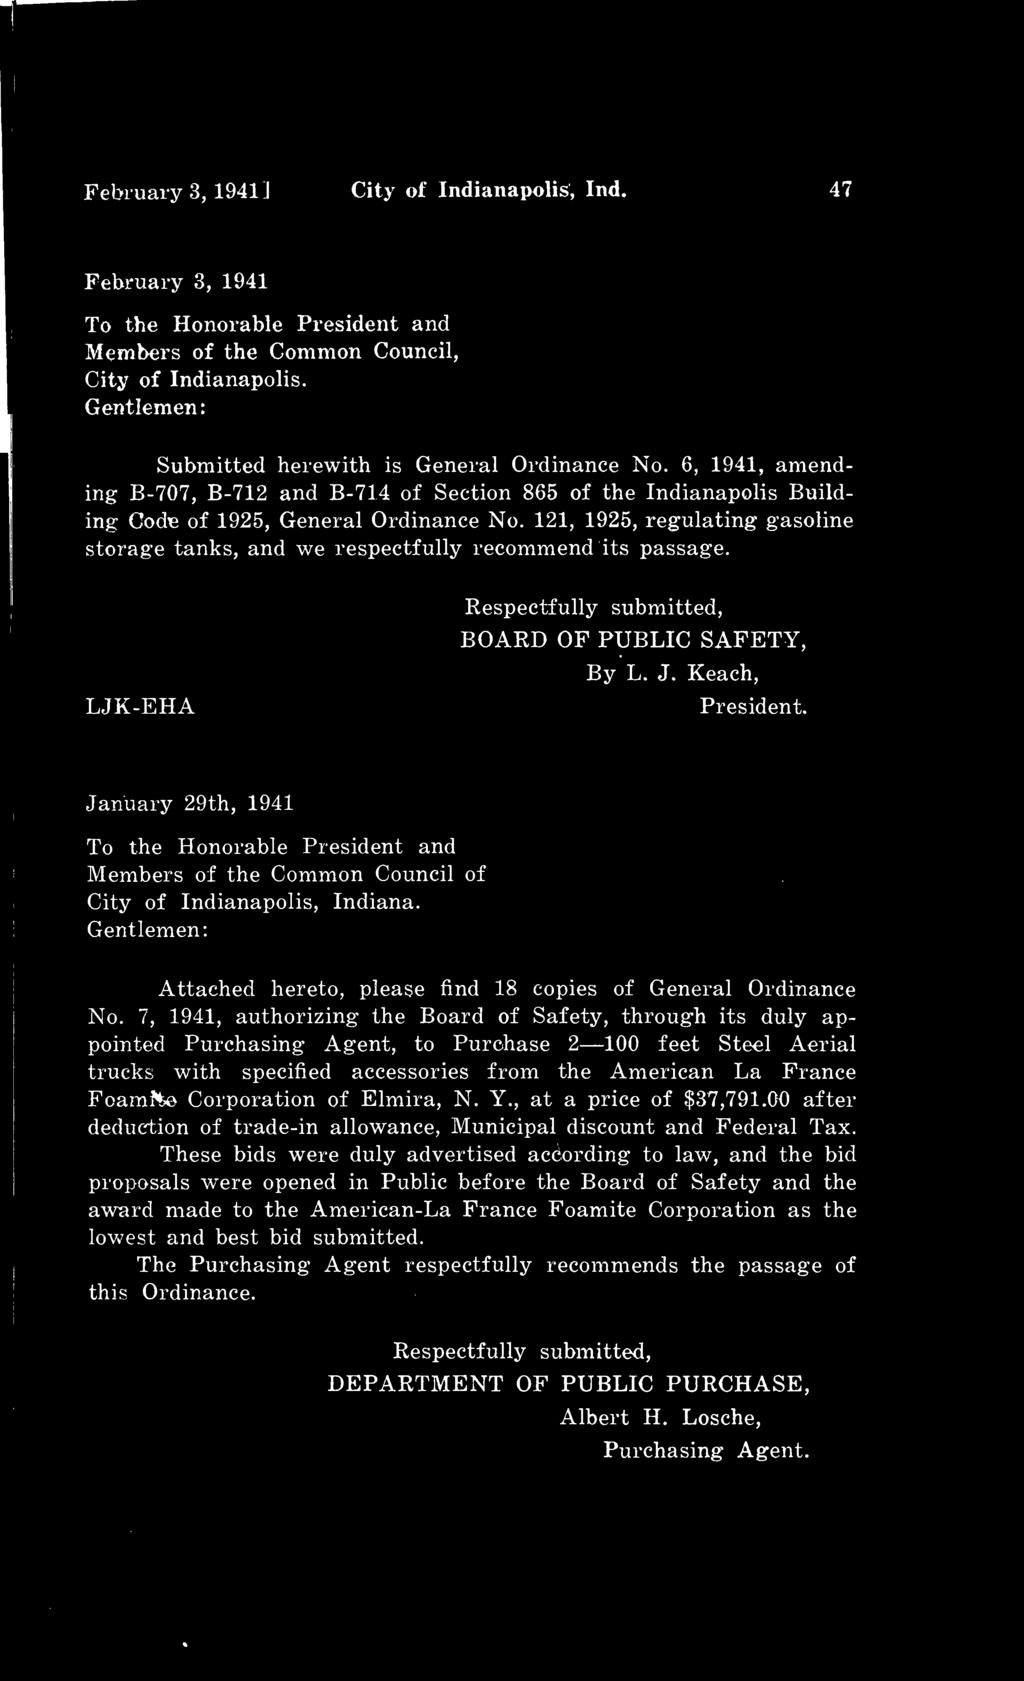 121, 1925, regulating gasoline storage tanks, and we respectfully recommend its passage. LJK-EHA Respectfully submitted, BOARD OF PUBLIC SAFETY, By L. J. Reach, President.